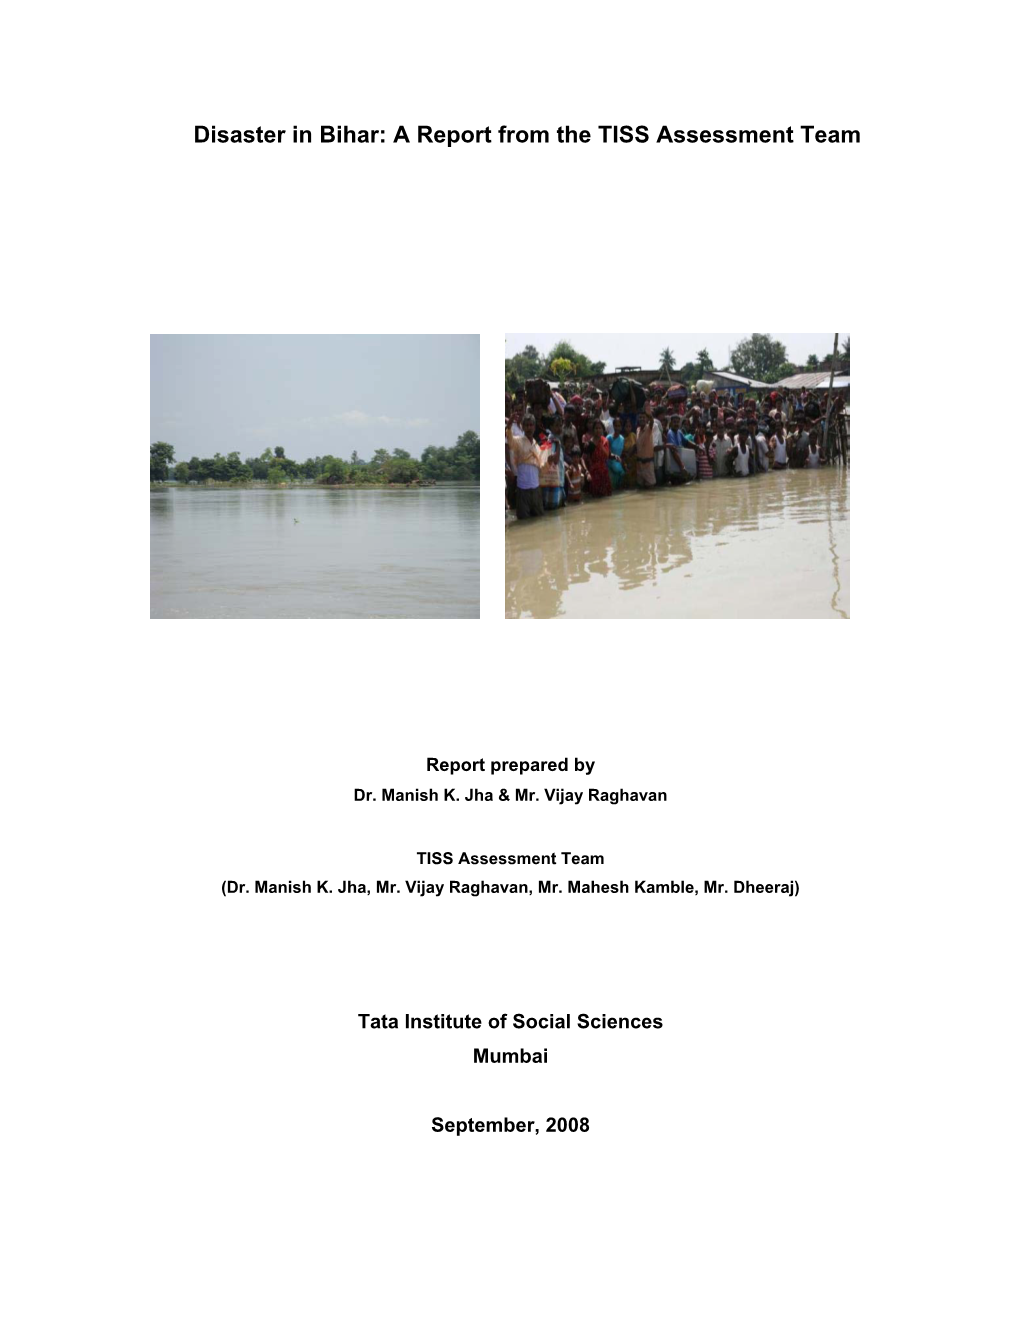 Disaster in Bihar: a Report from the TISS Assessment Team